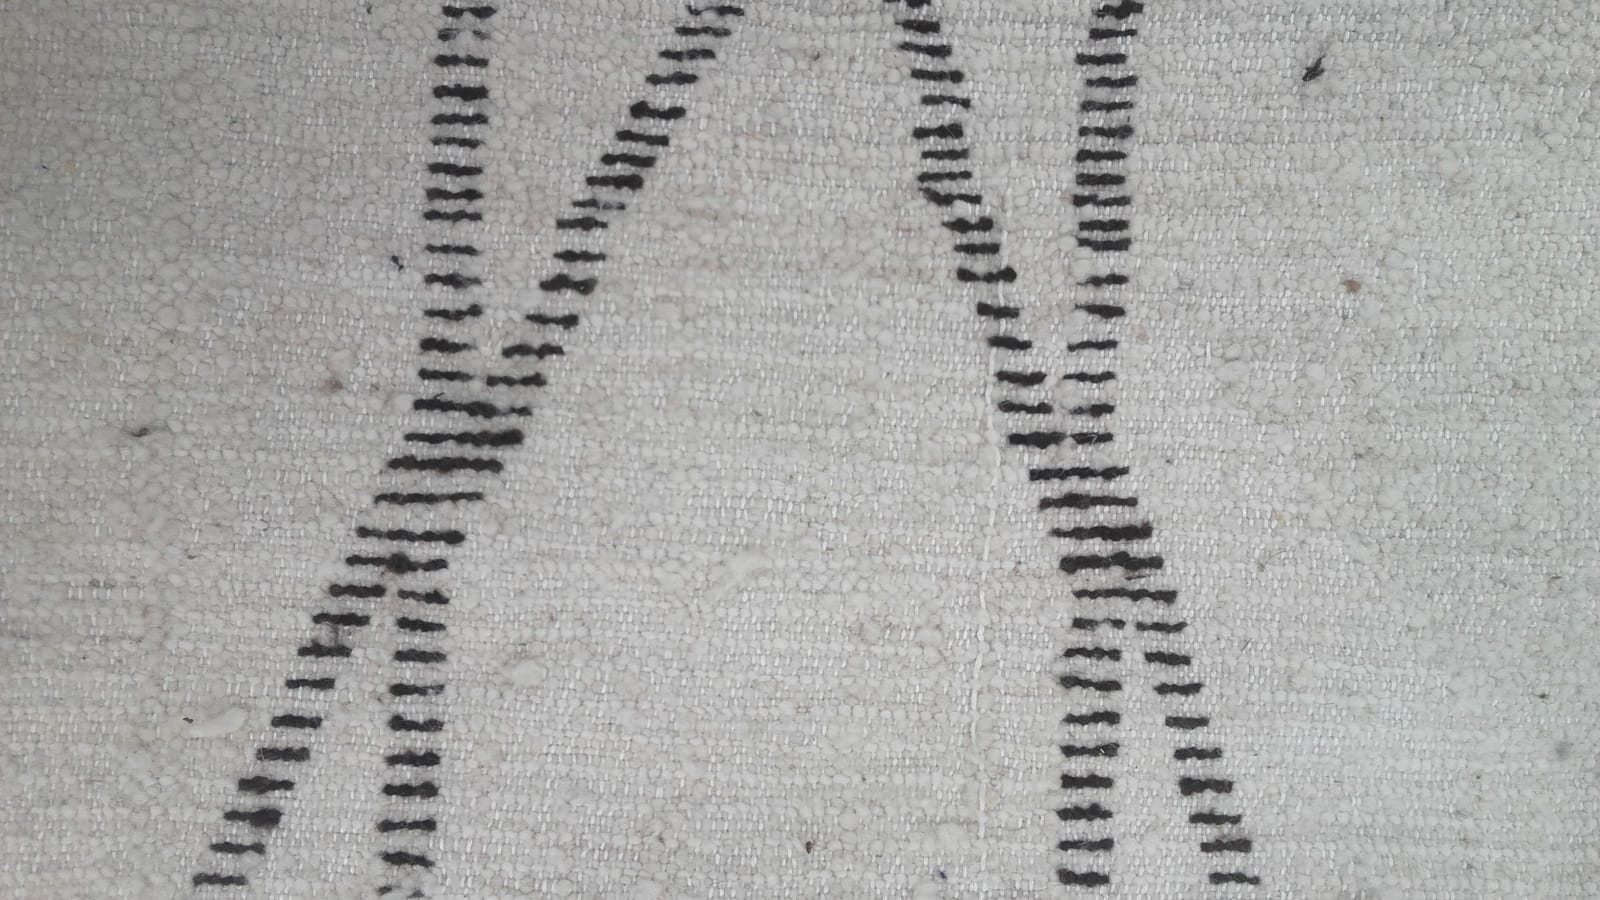  Pile Knot Rug Wool Black, White Morocco